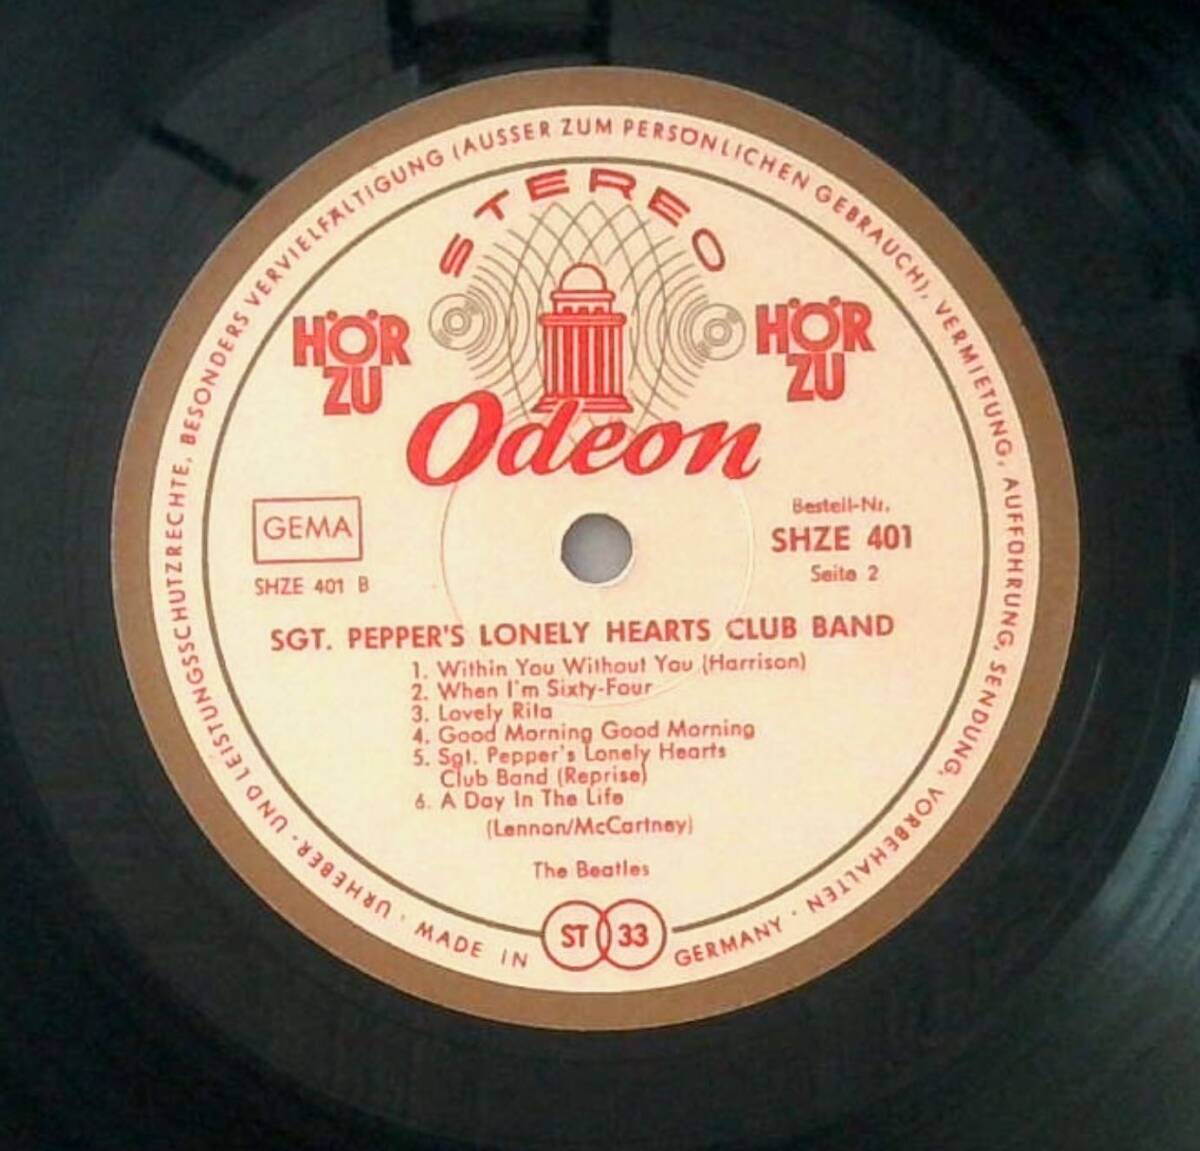 The Beatles SGT. Peppers Loleny Herats Club Band ドイツオリジナル盤 Odeon Horzu SHZE 401 LP レコード_画像6